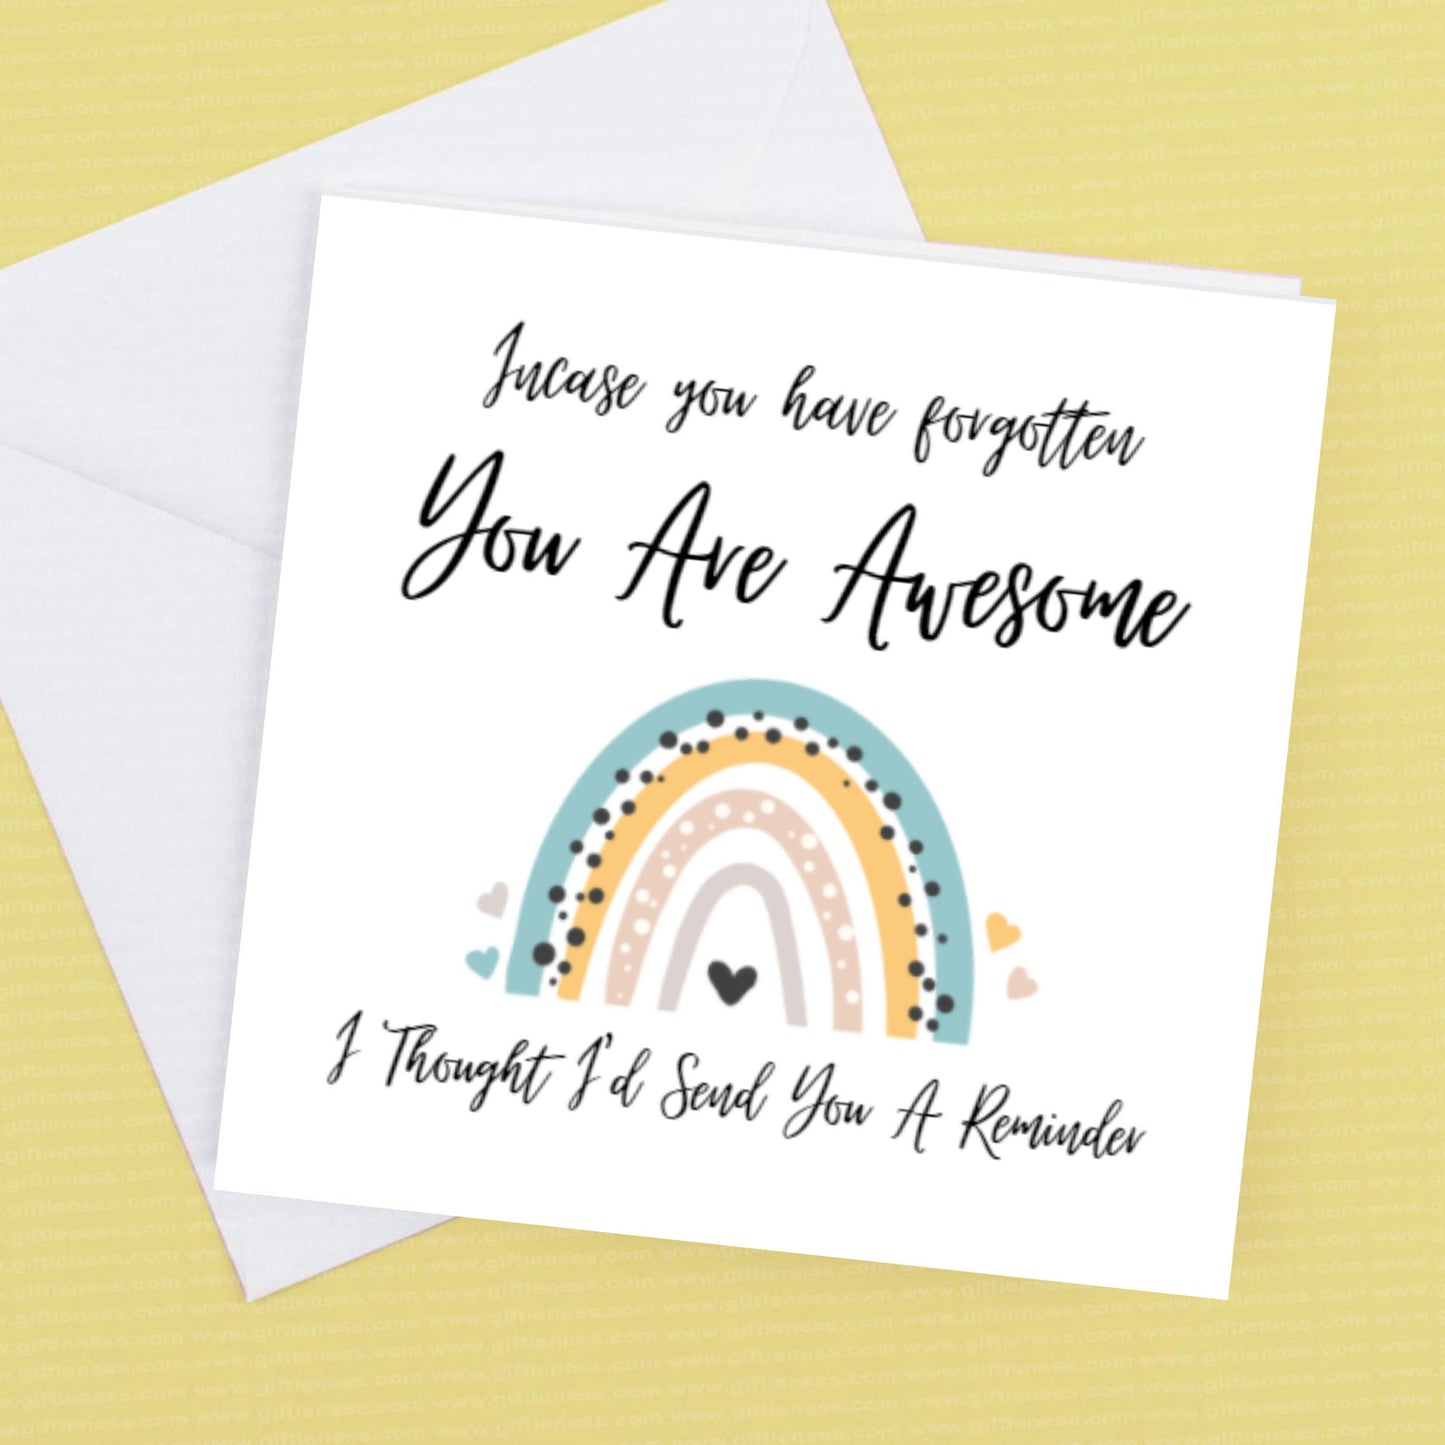 You Are Awesome (incase you have forgotten) - Positivity - card and envelope